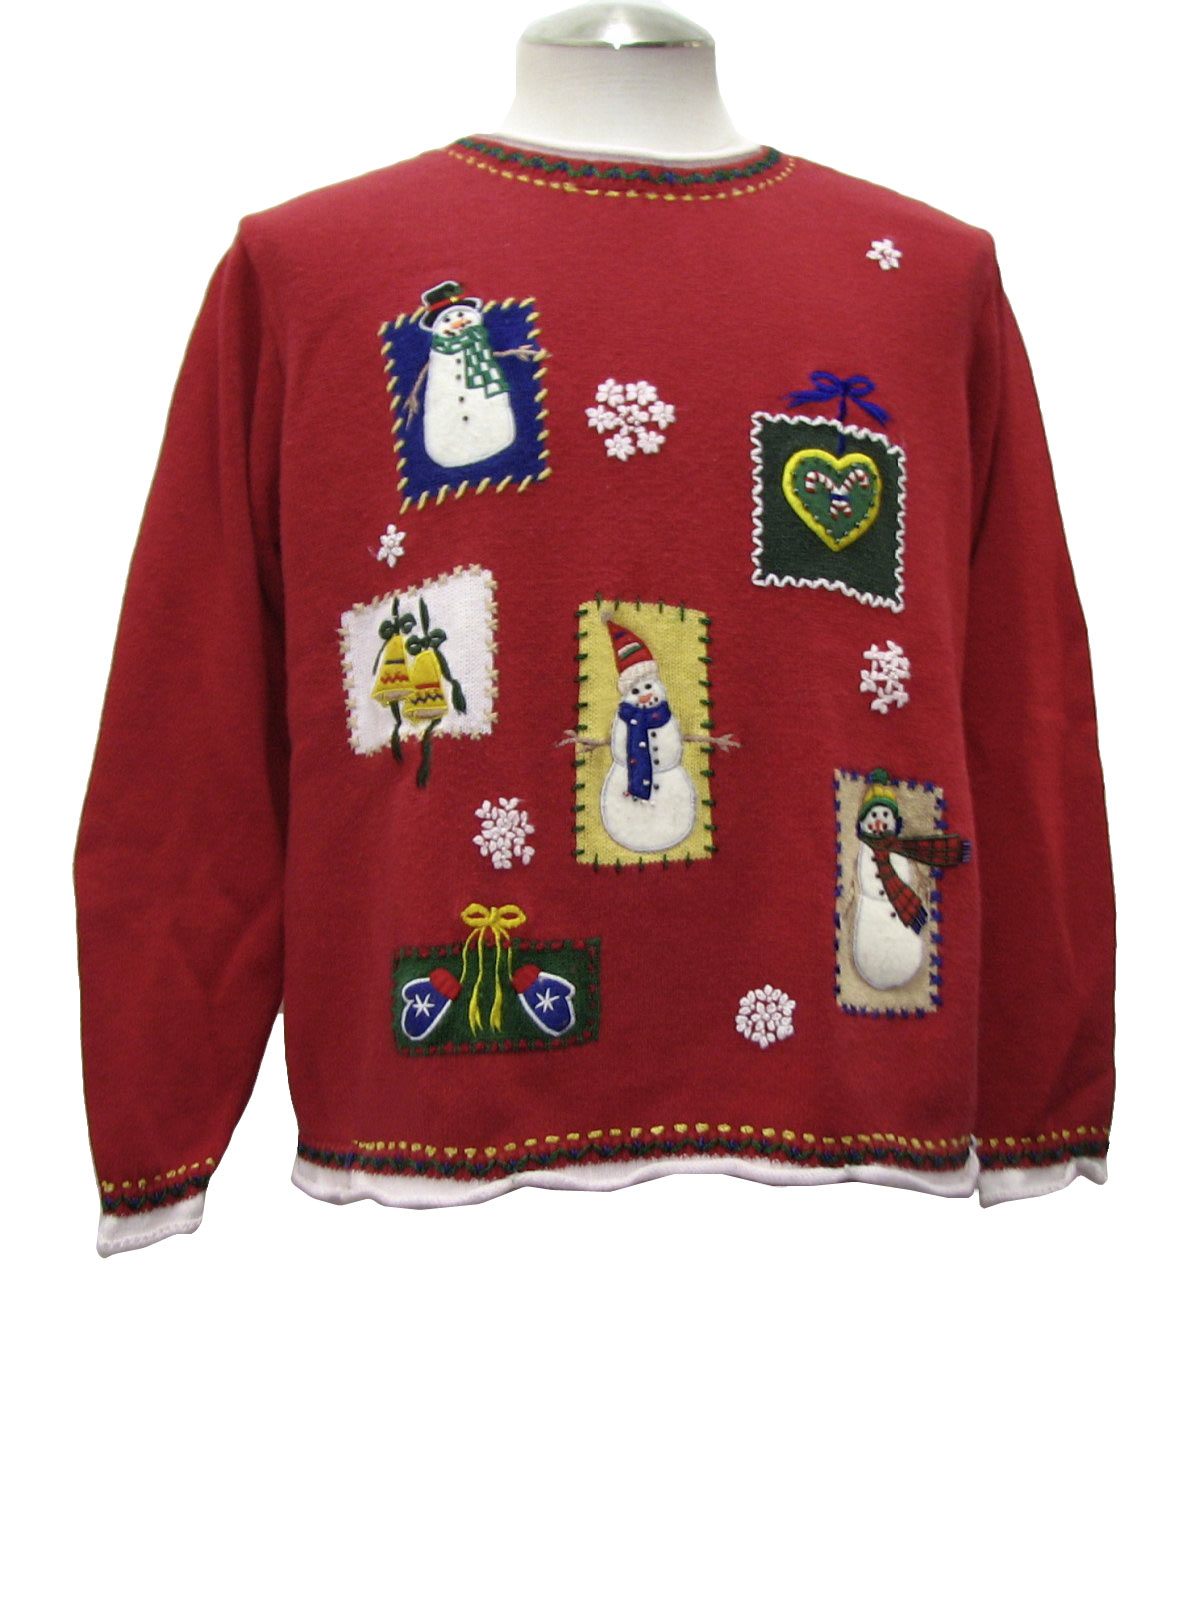 Ugly Christmas Sweater: -Arriviste- Unisex red background ramie cotton ...